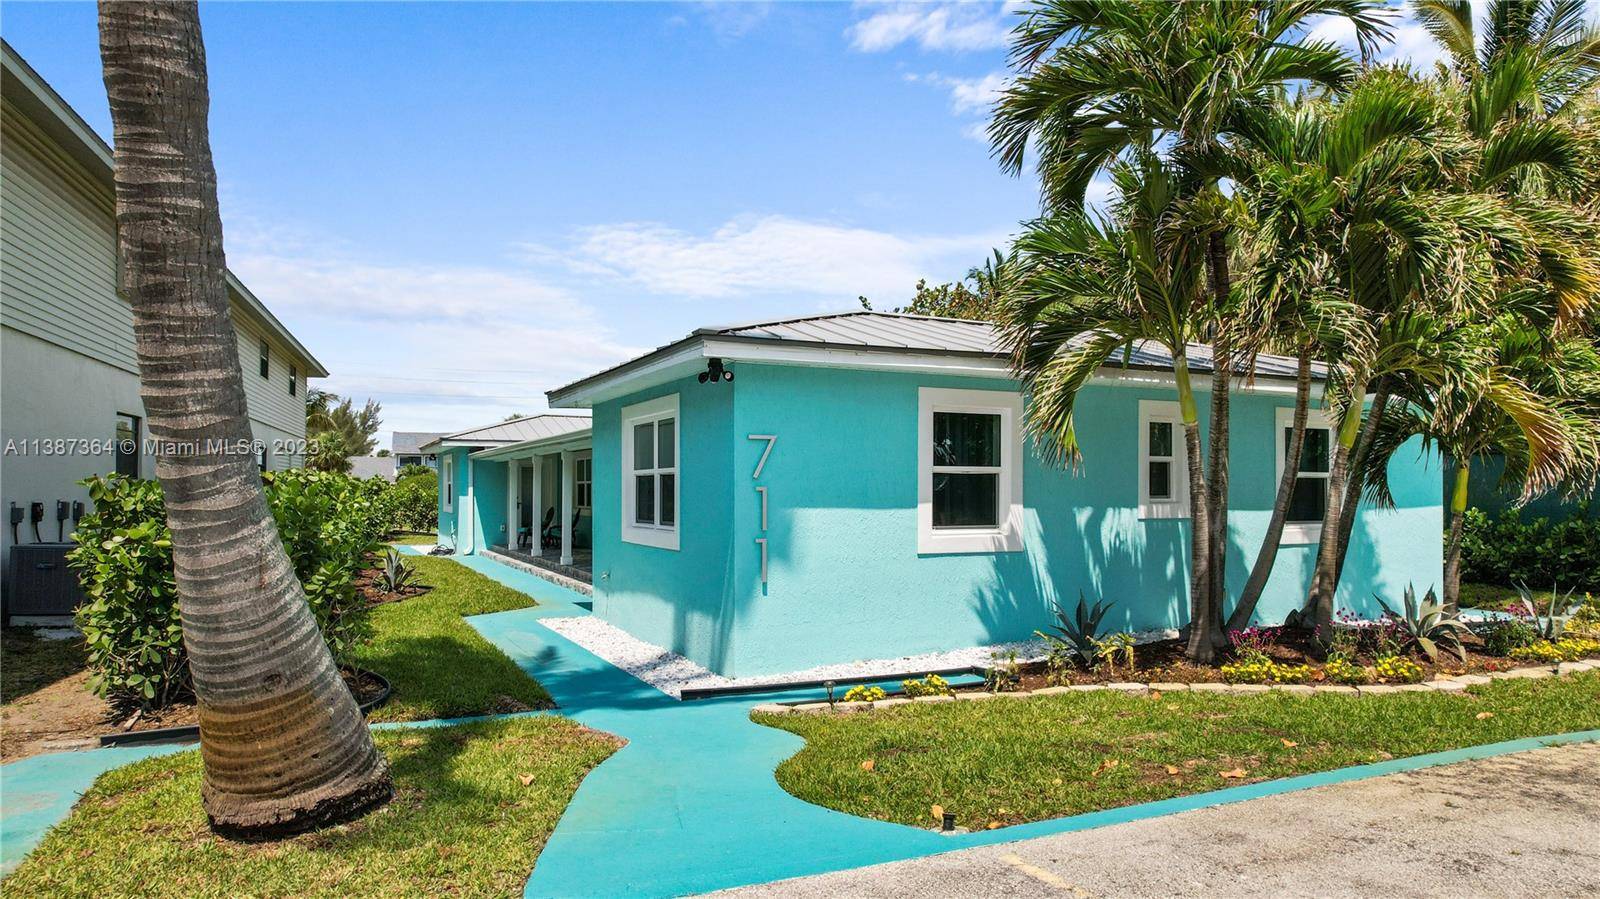 What could be better than owning your own extremely rare turn key oceanside short term long term income property ?